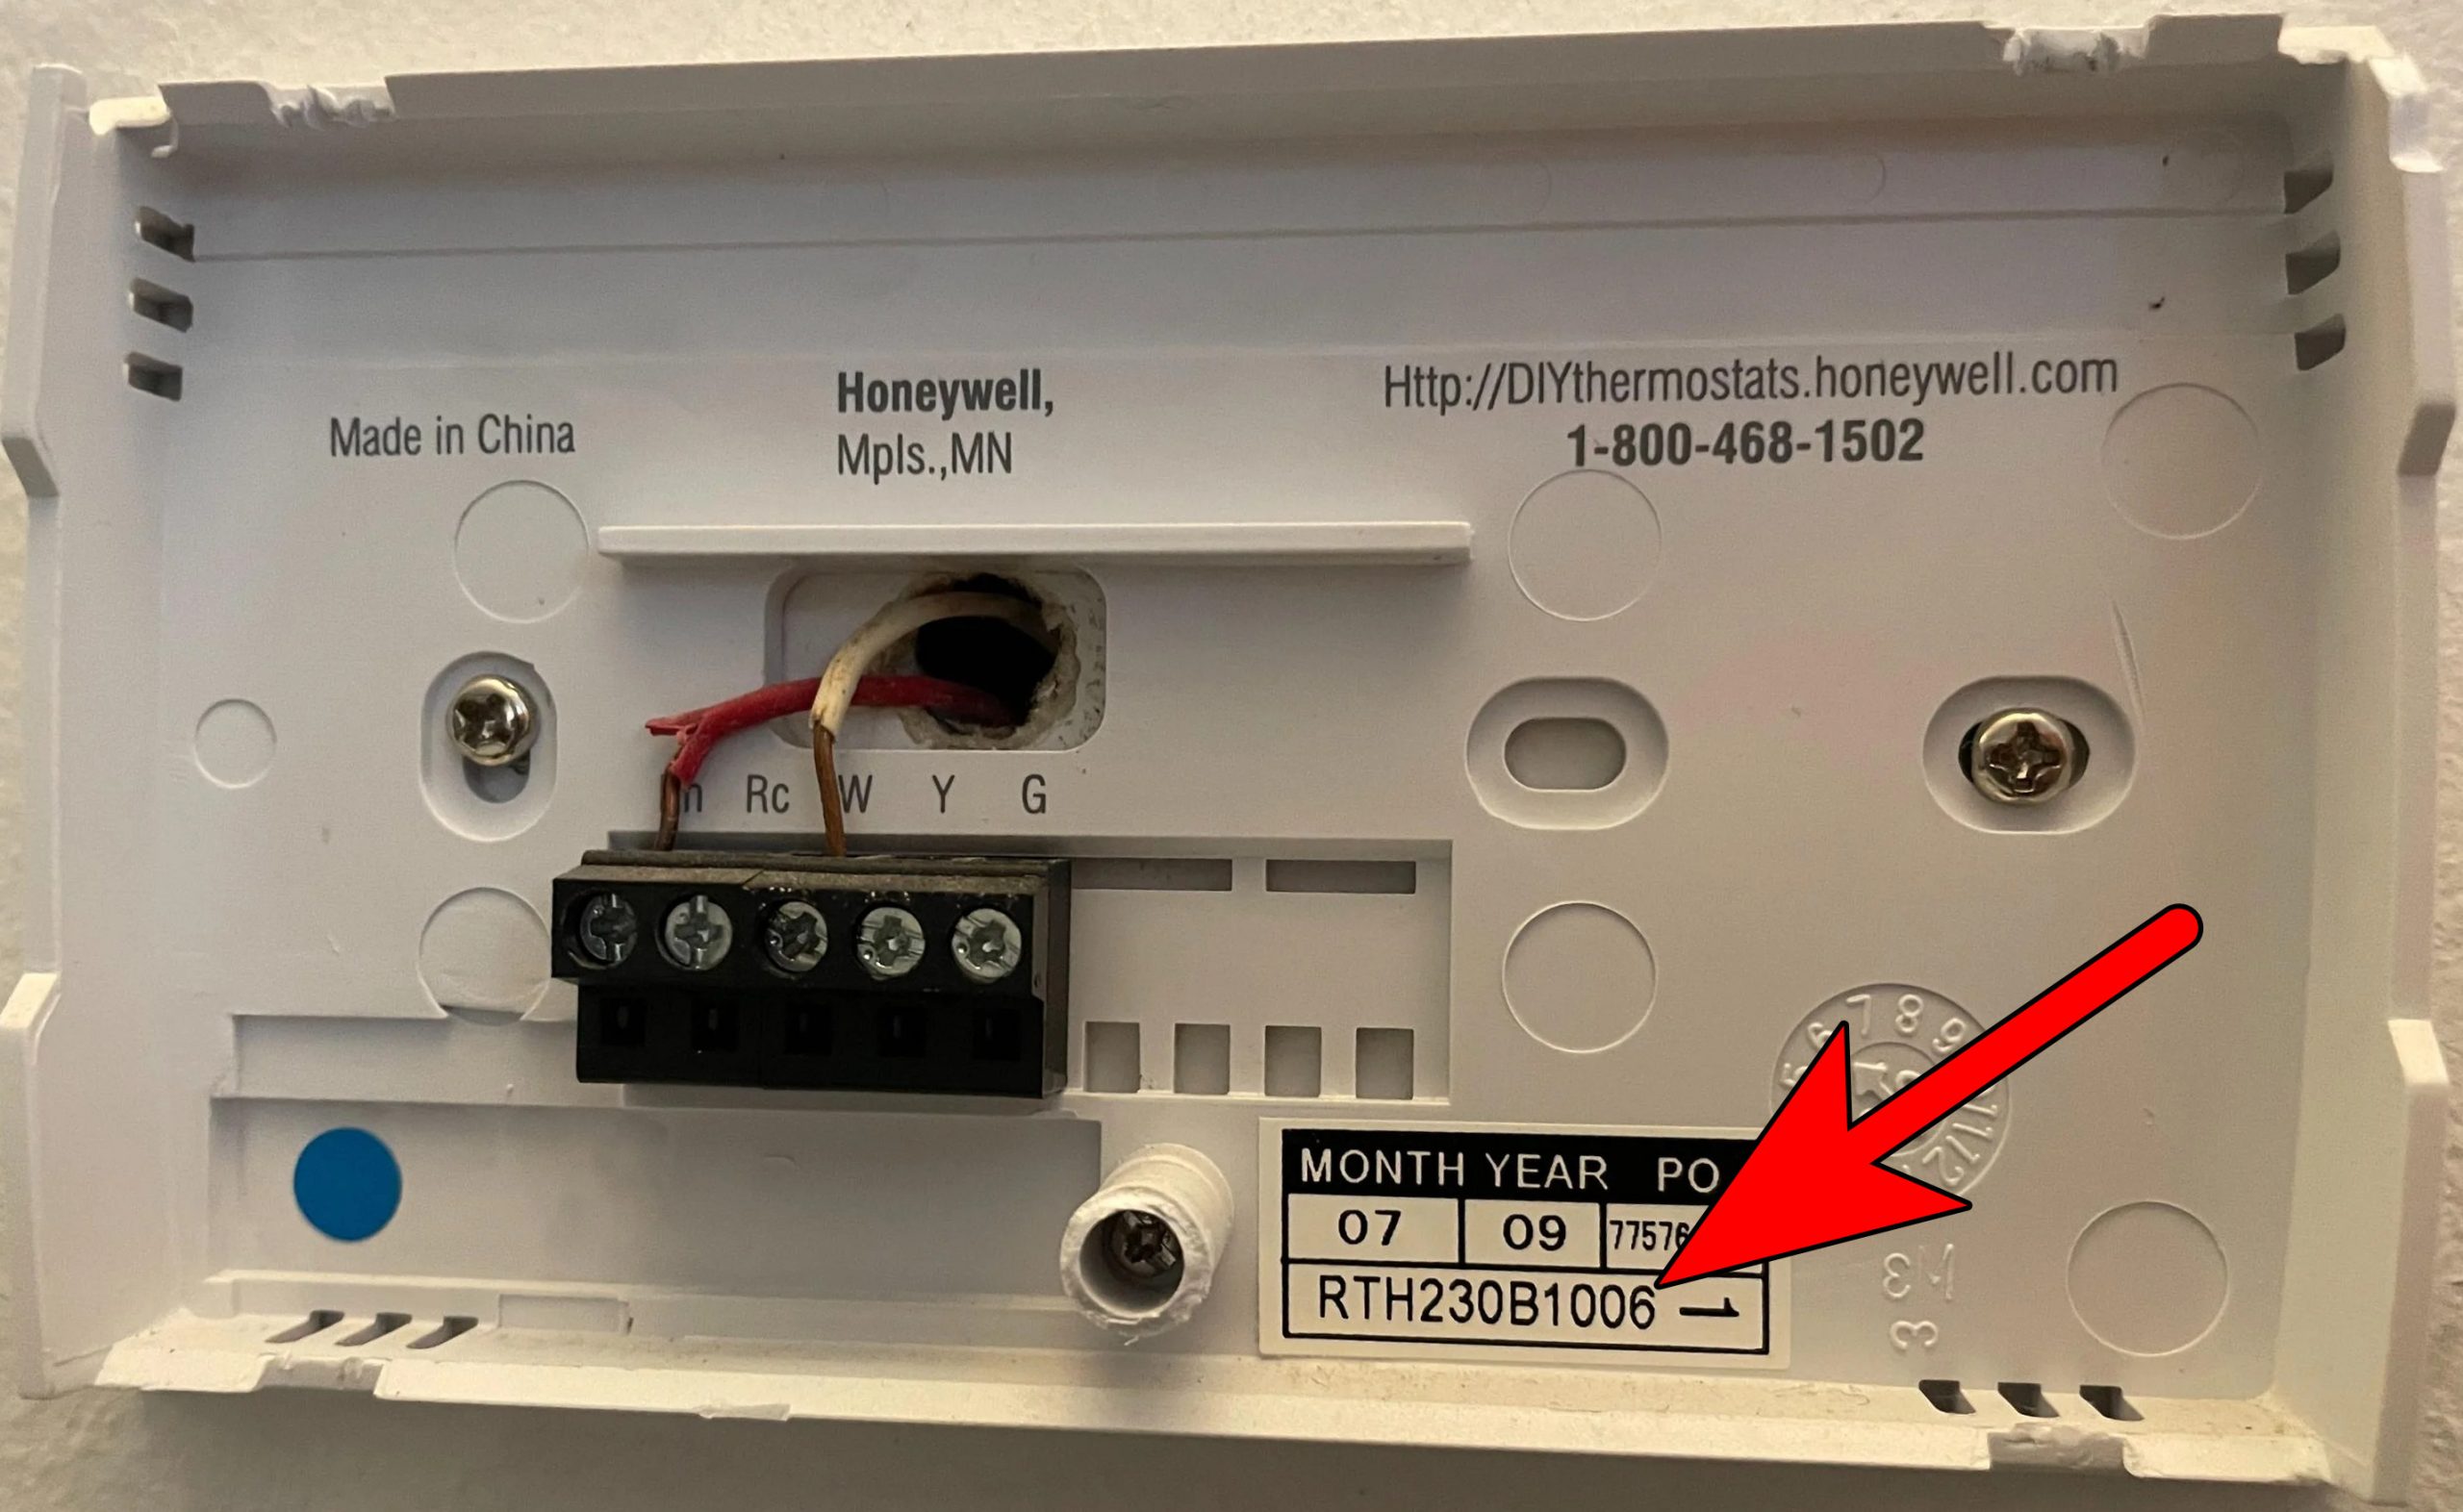 Check the Model of the Honeywell Thermostat